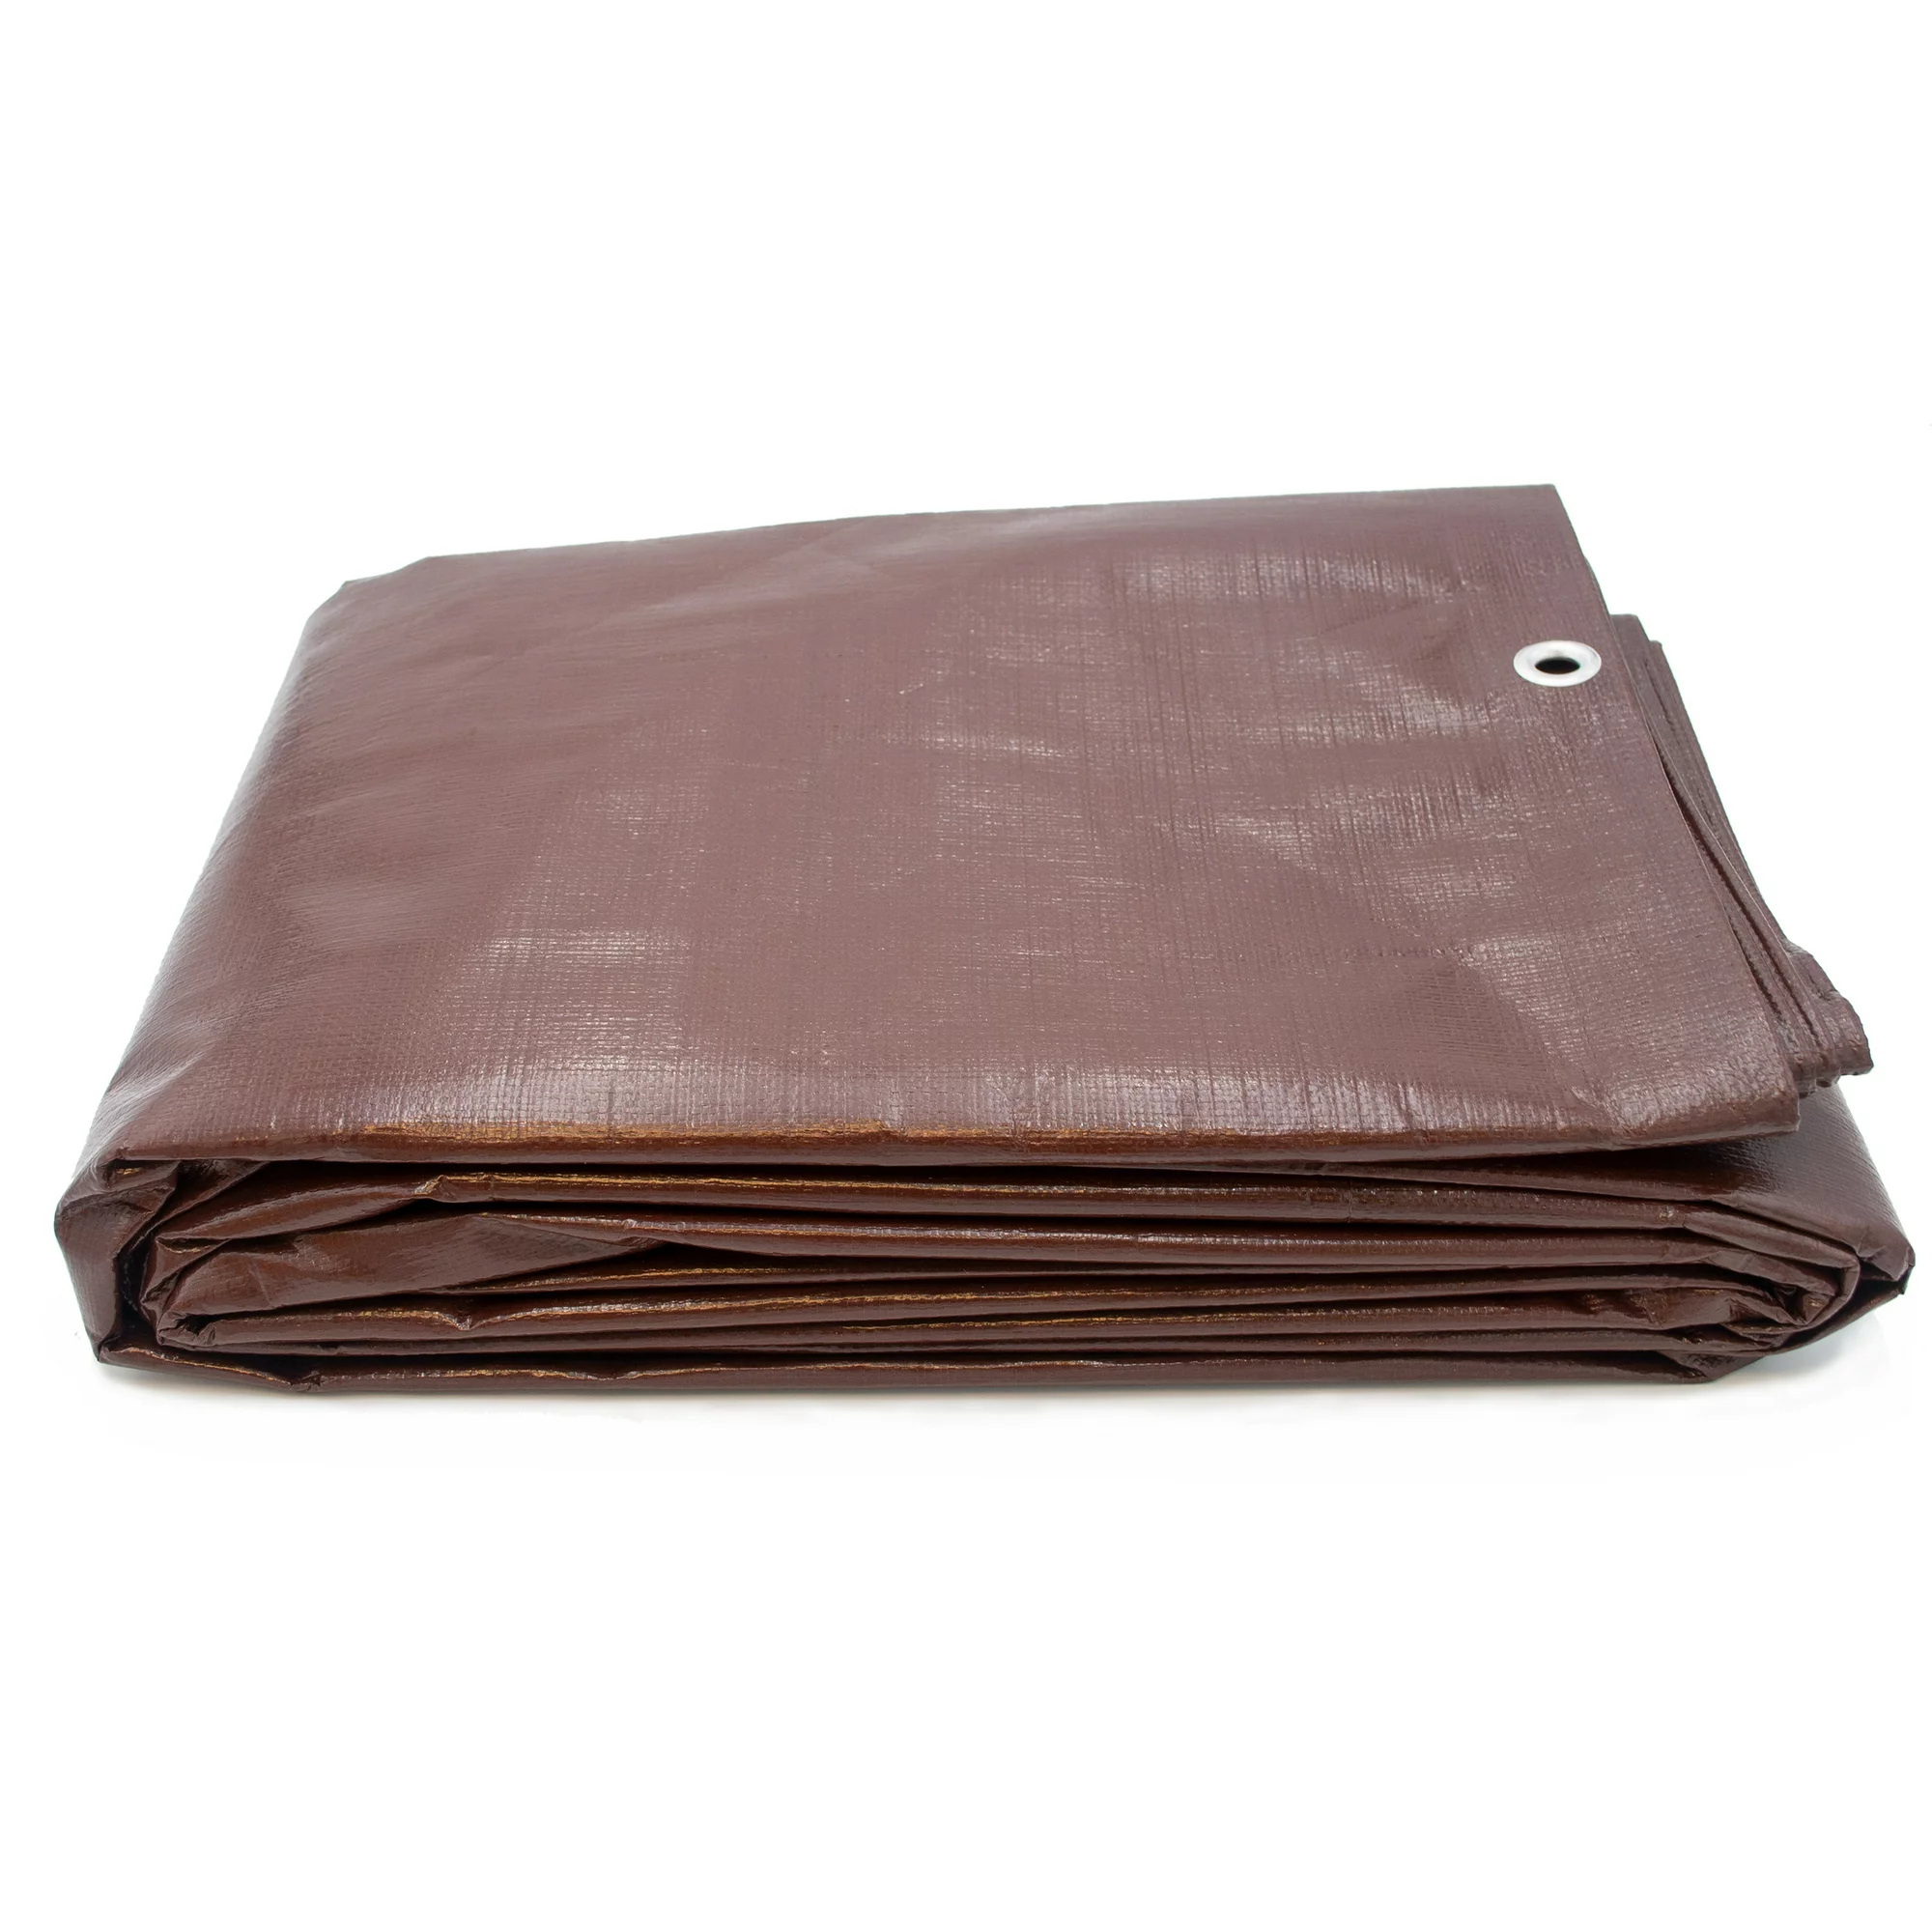 So.De.Pm Protection cover (Tarpaulin) Brown Waterproof, Protection from UV radiation 140g 1.5x6m